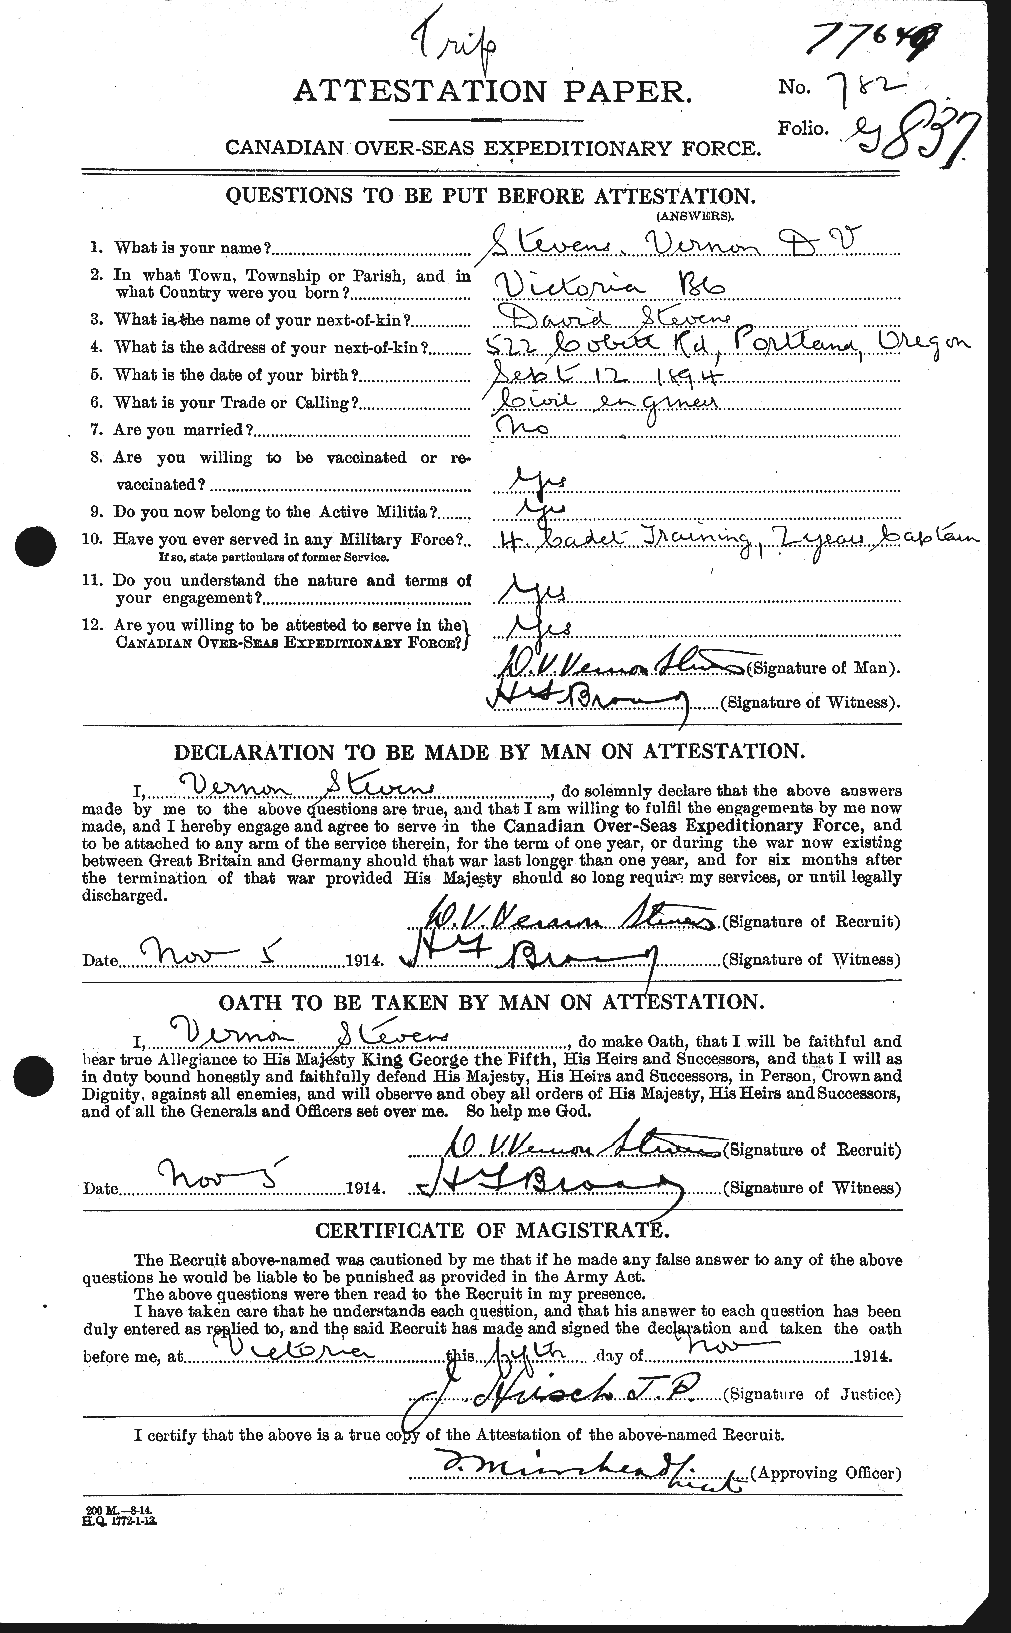 Personnel Records of the First World War - CEF 118255a